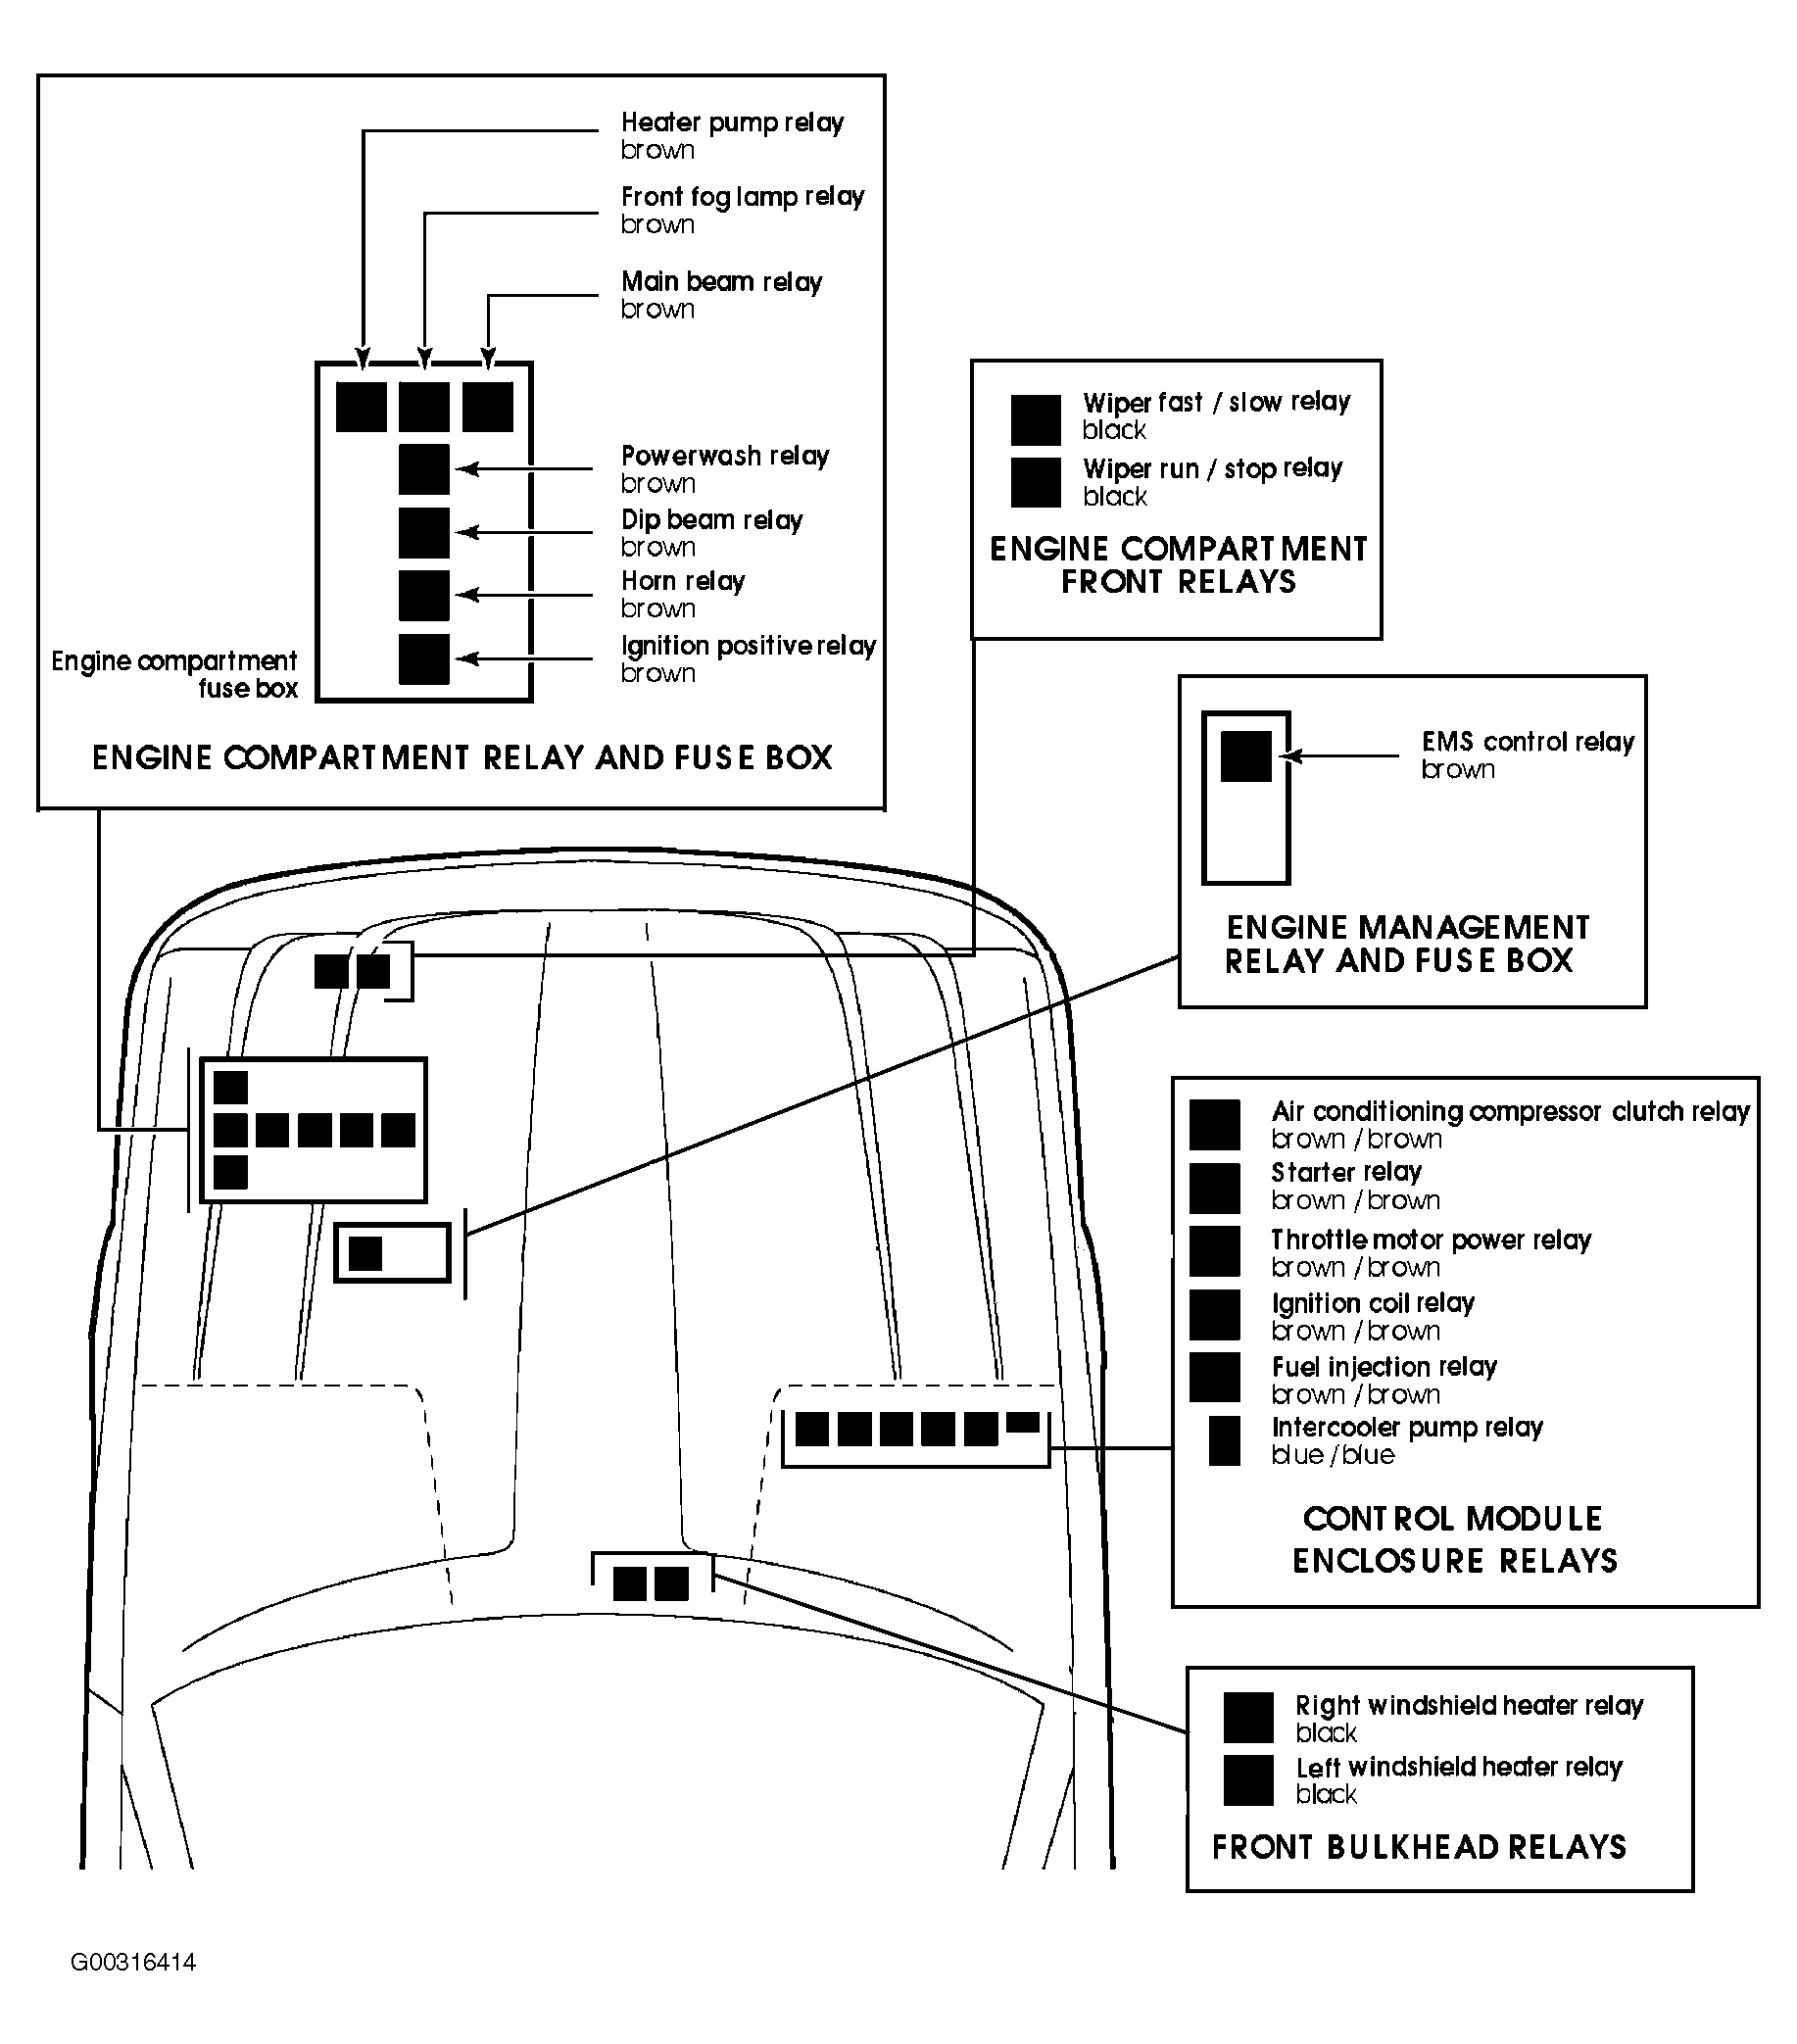 Jaguar XJ8 L 1998 - Component Locations -  Identifying Engine Compartment Fuse/Relay Locations